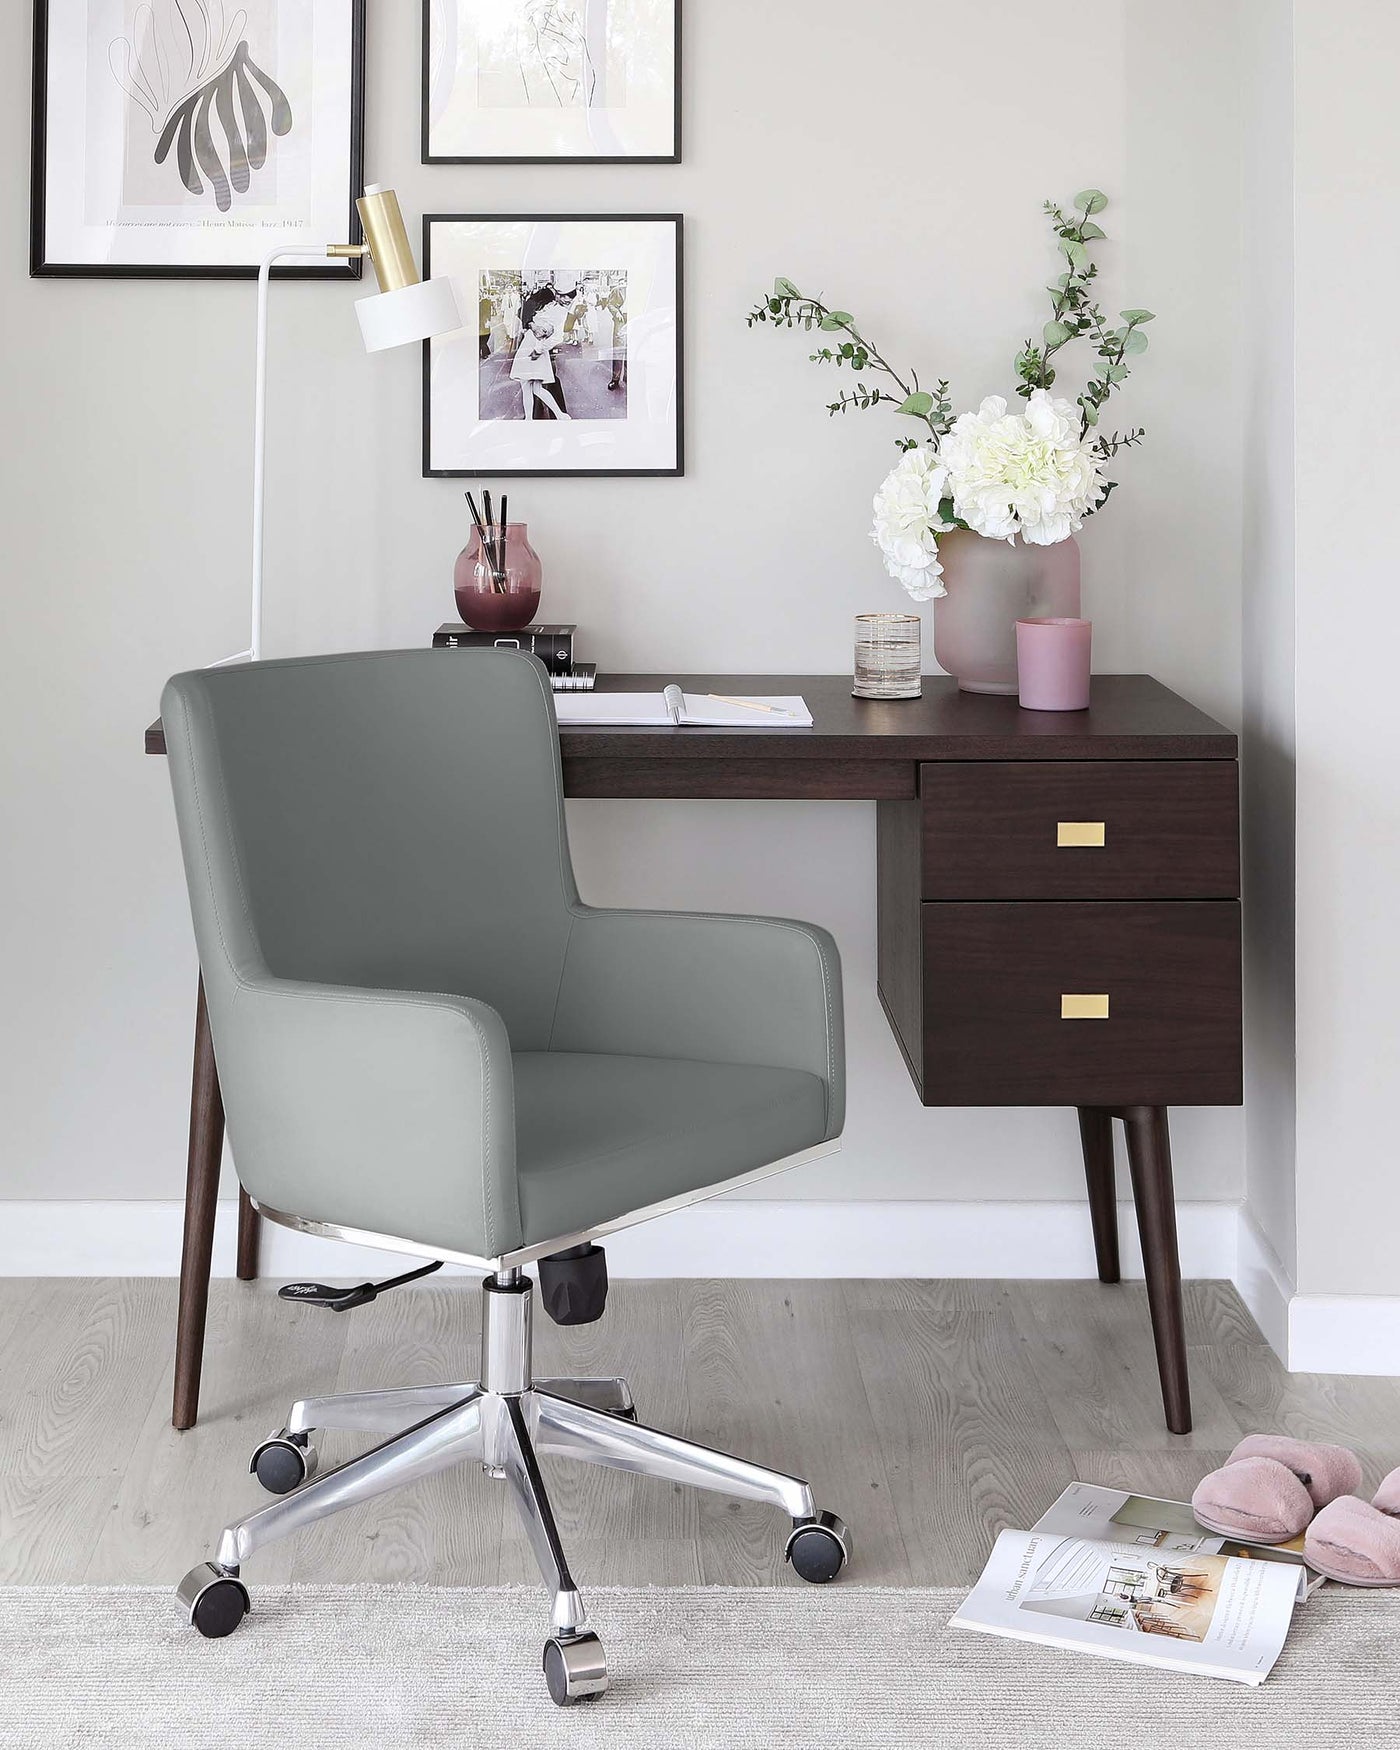 A modern home office setup featuring a sleek, mid-century inspired dark wood desk with an open work surface, one drawer, and a storage compartment with brass handle accents, paired with a comfortable, grey upholstered swivel chair with a high backrest and mounted on a five-point chrome base with caster wheels. A light area rug sits beneath the furniture ensemble.